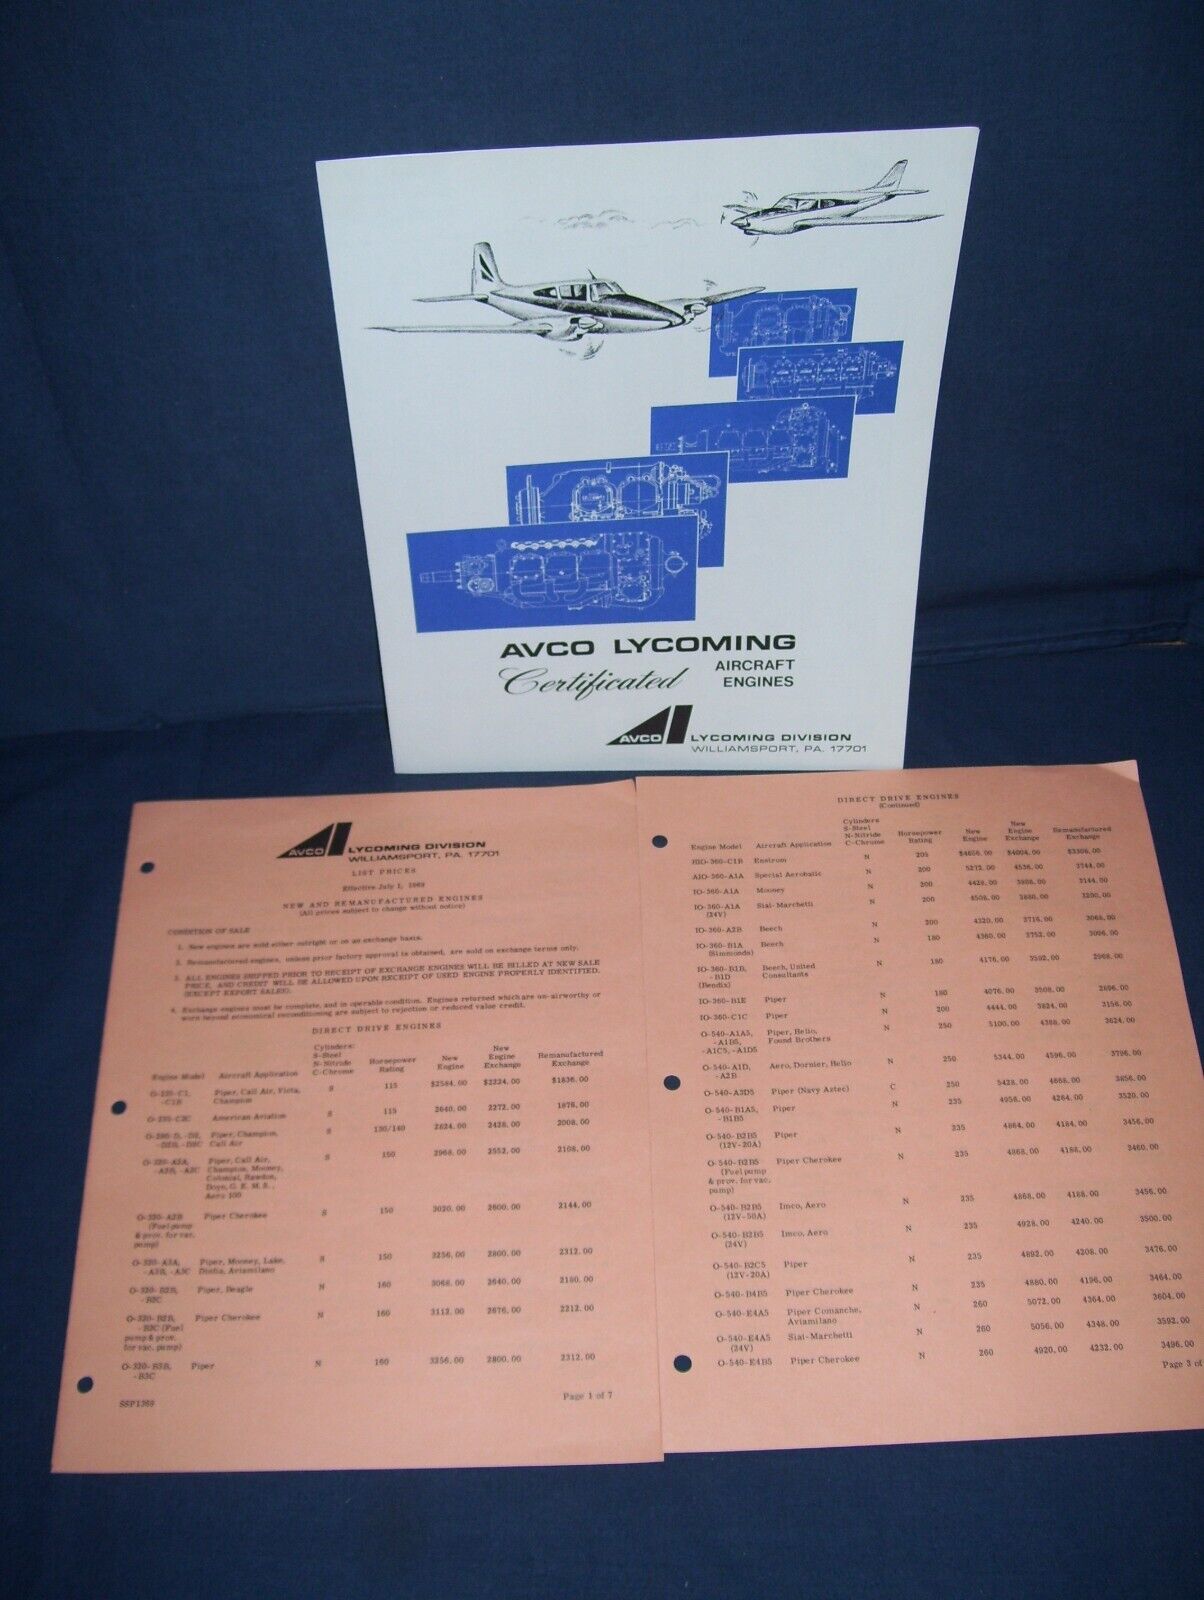 Vintage Avco Lycoming Service Performance Flyer and List Price Sheet Used 1969